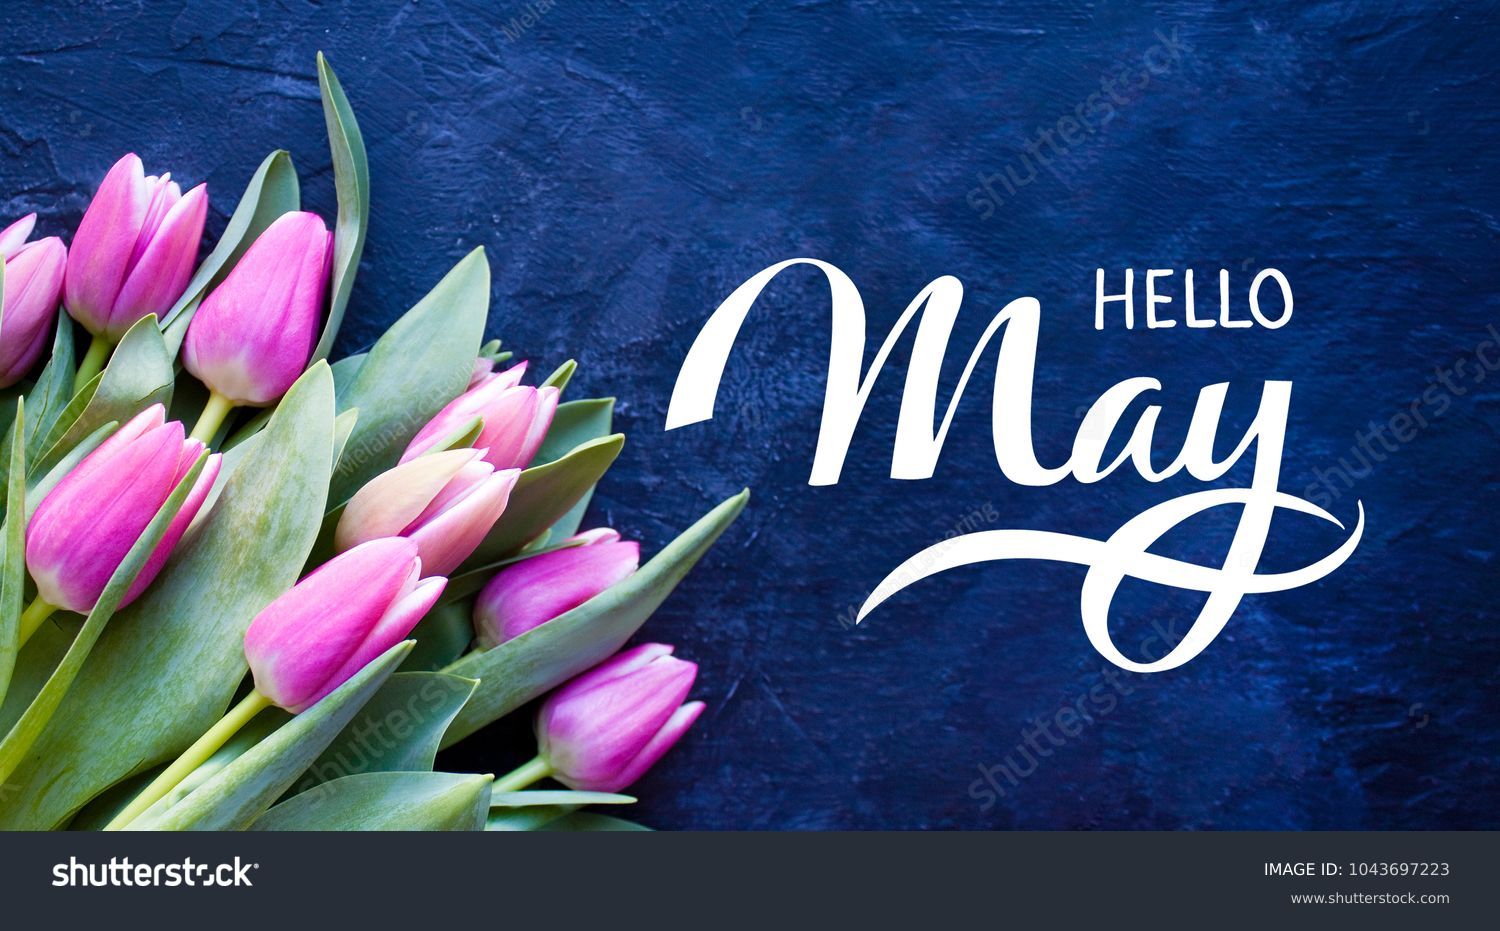 Hello May hand lettering card. Spring tulip flowers on dark blue background. #1043697223